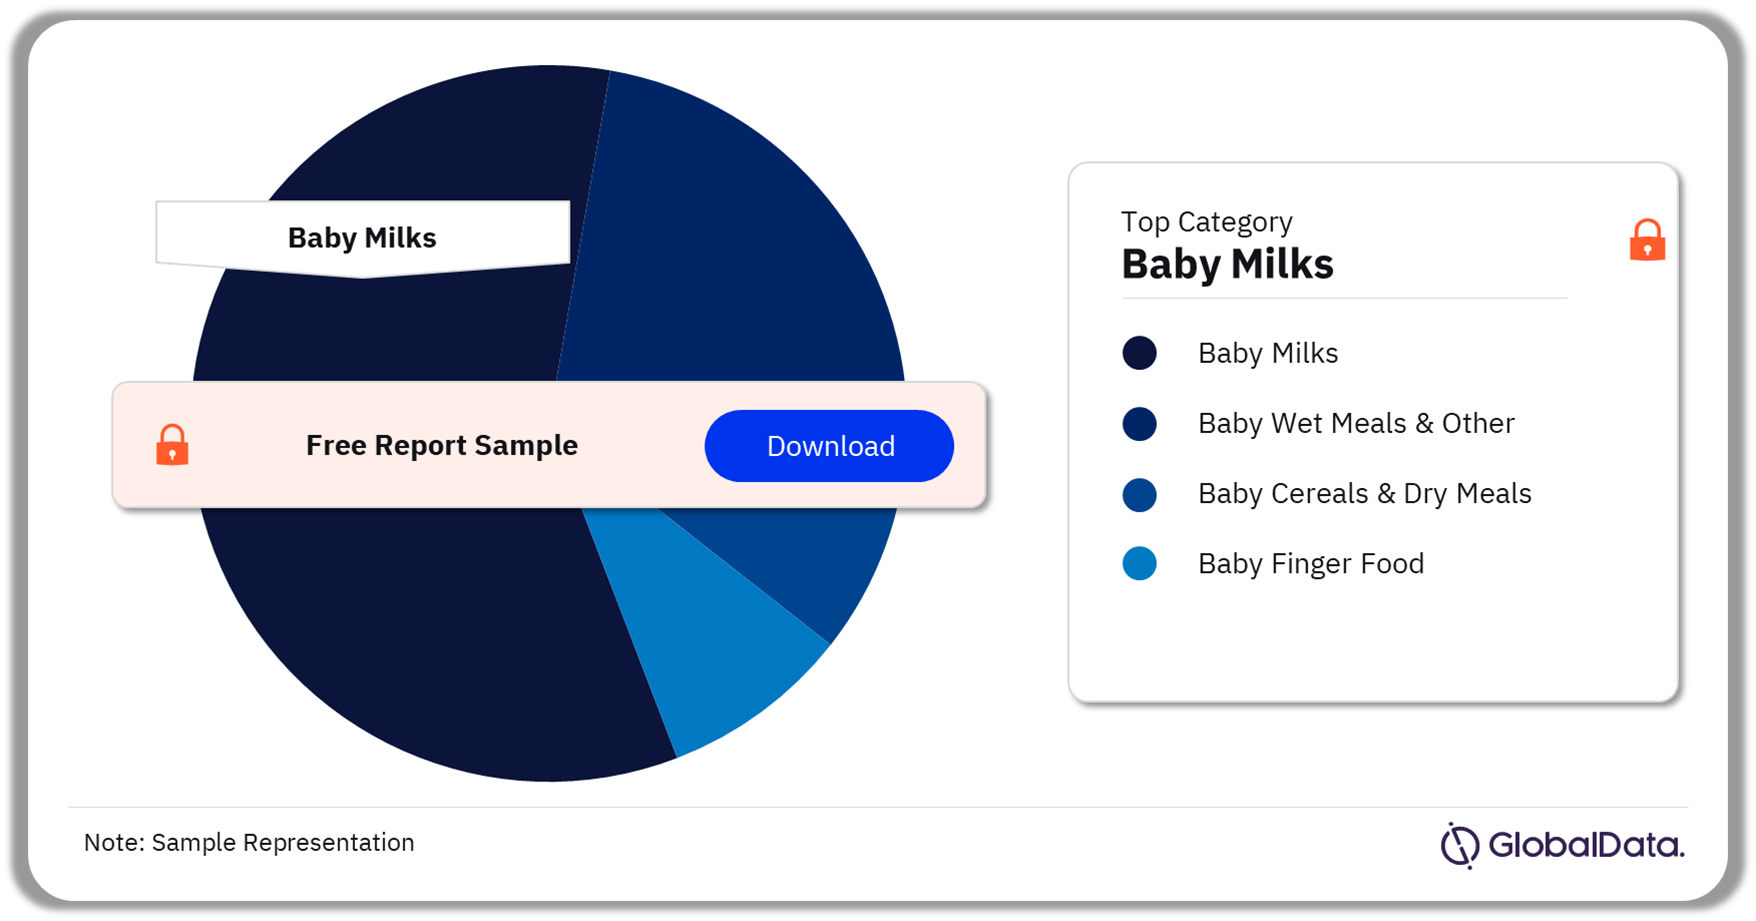 Baby milk was the leading Malaysian baby food category in 2022